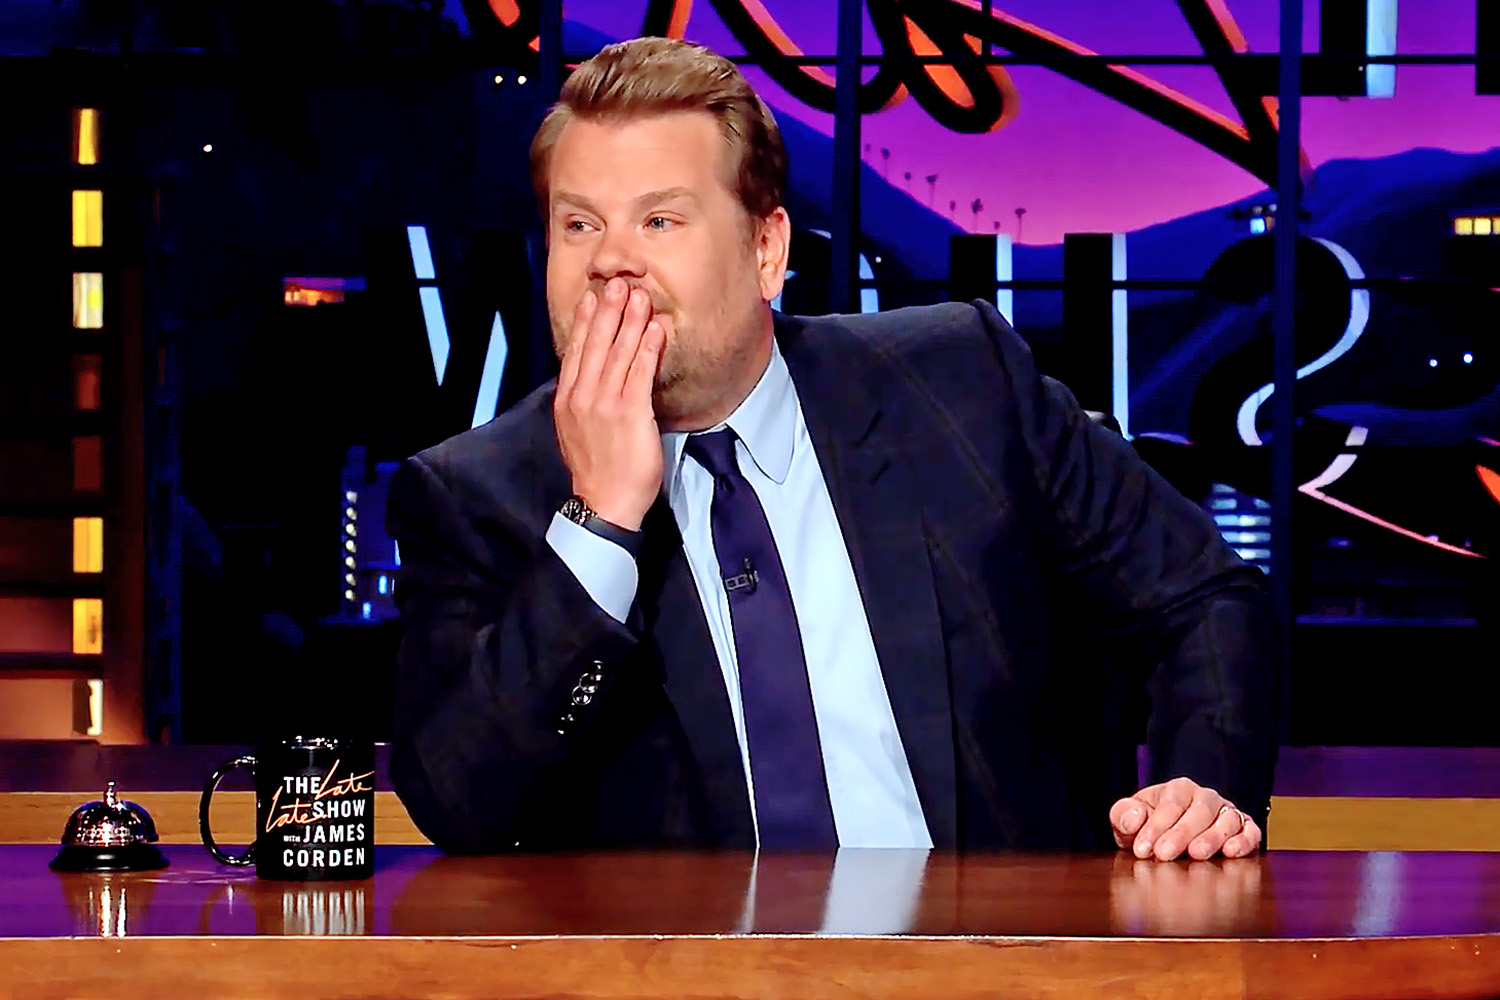 James Corden Announces Departure from CBS’s Late-Night Show in 2023